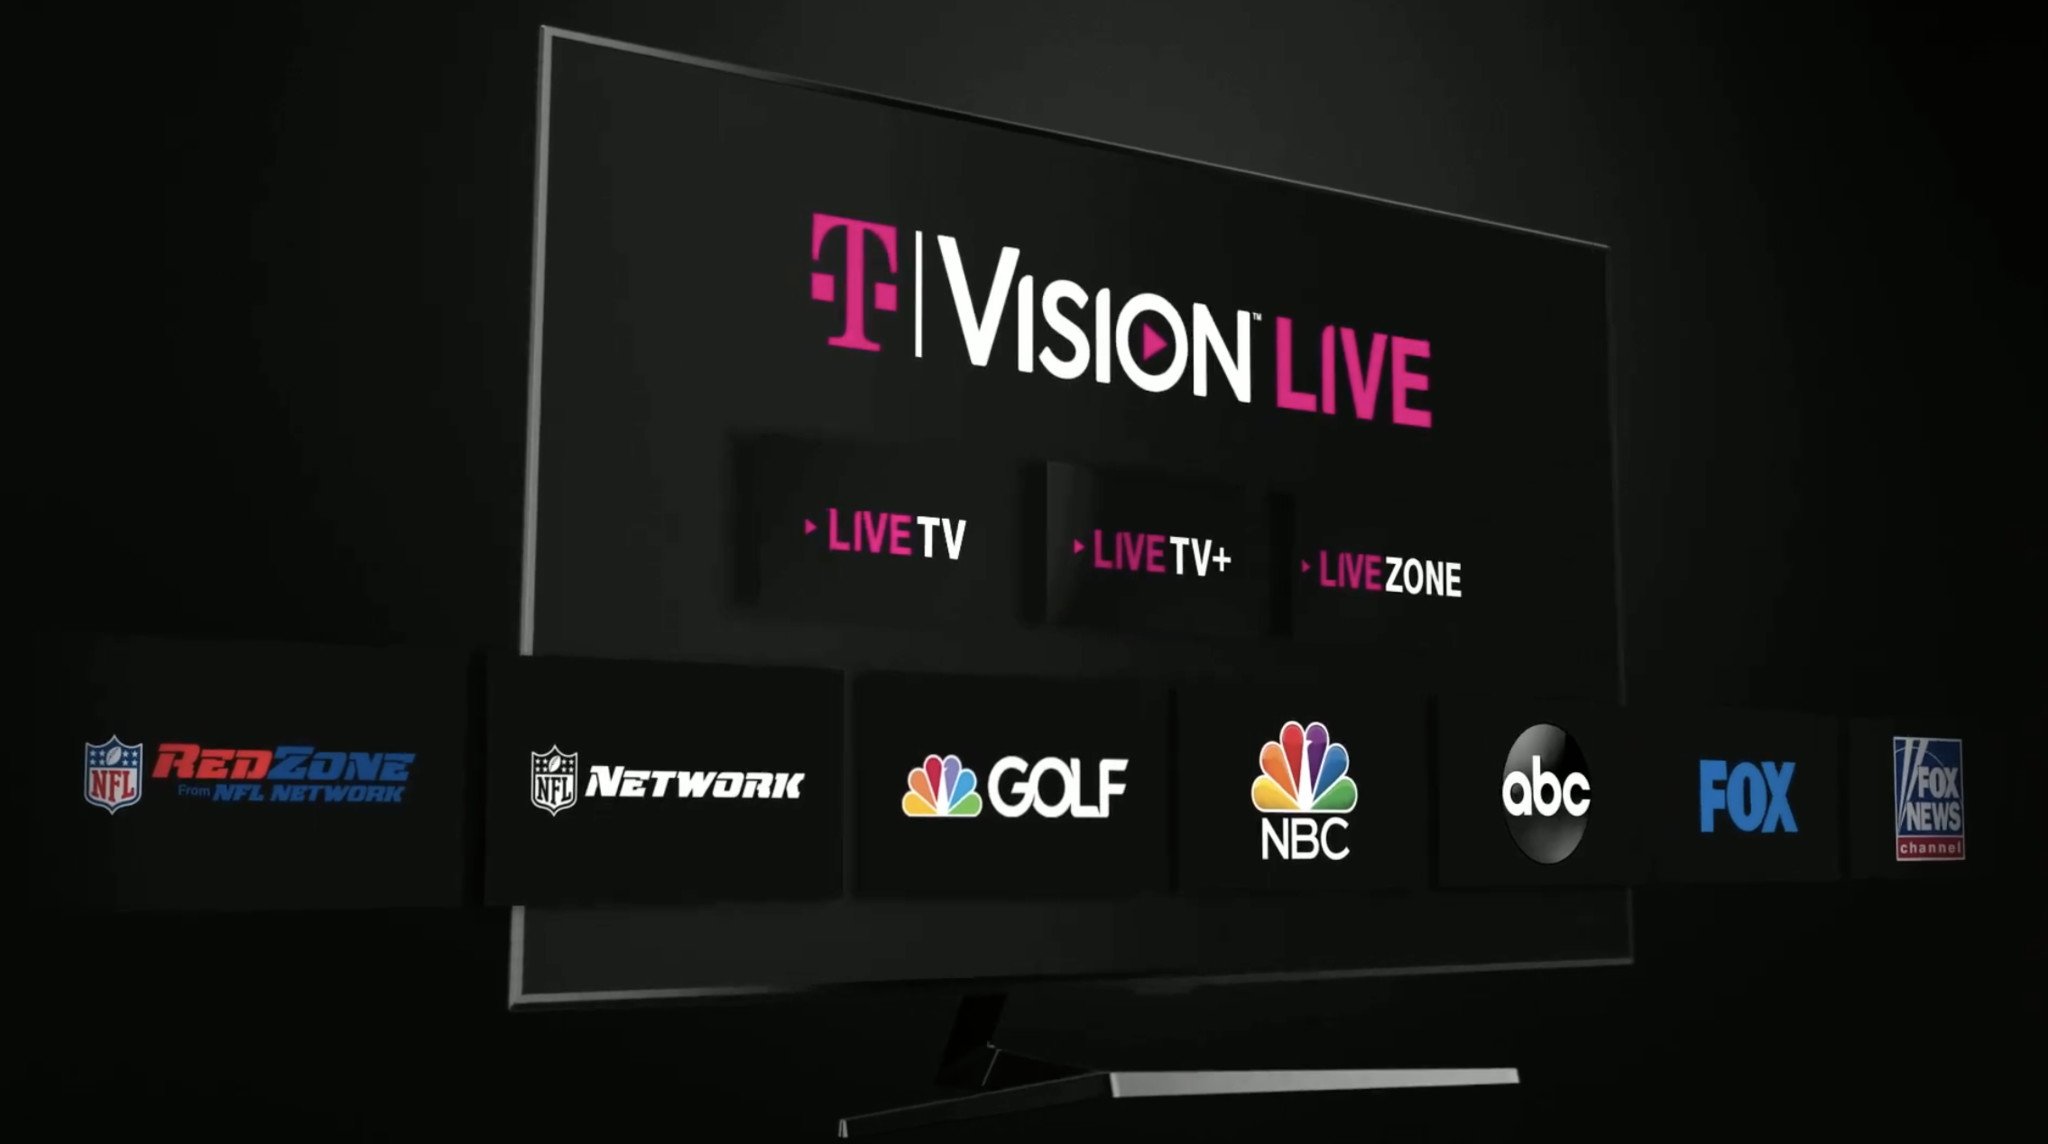 T-Mobile's TVision streaming service offers live TV for just $10/month